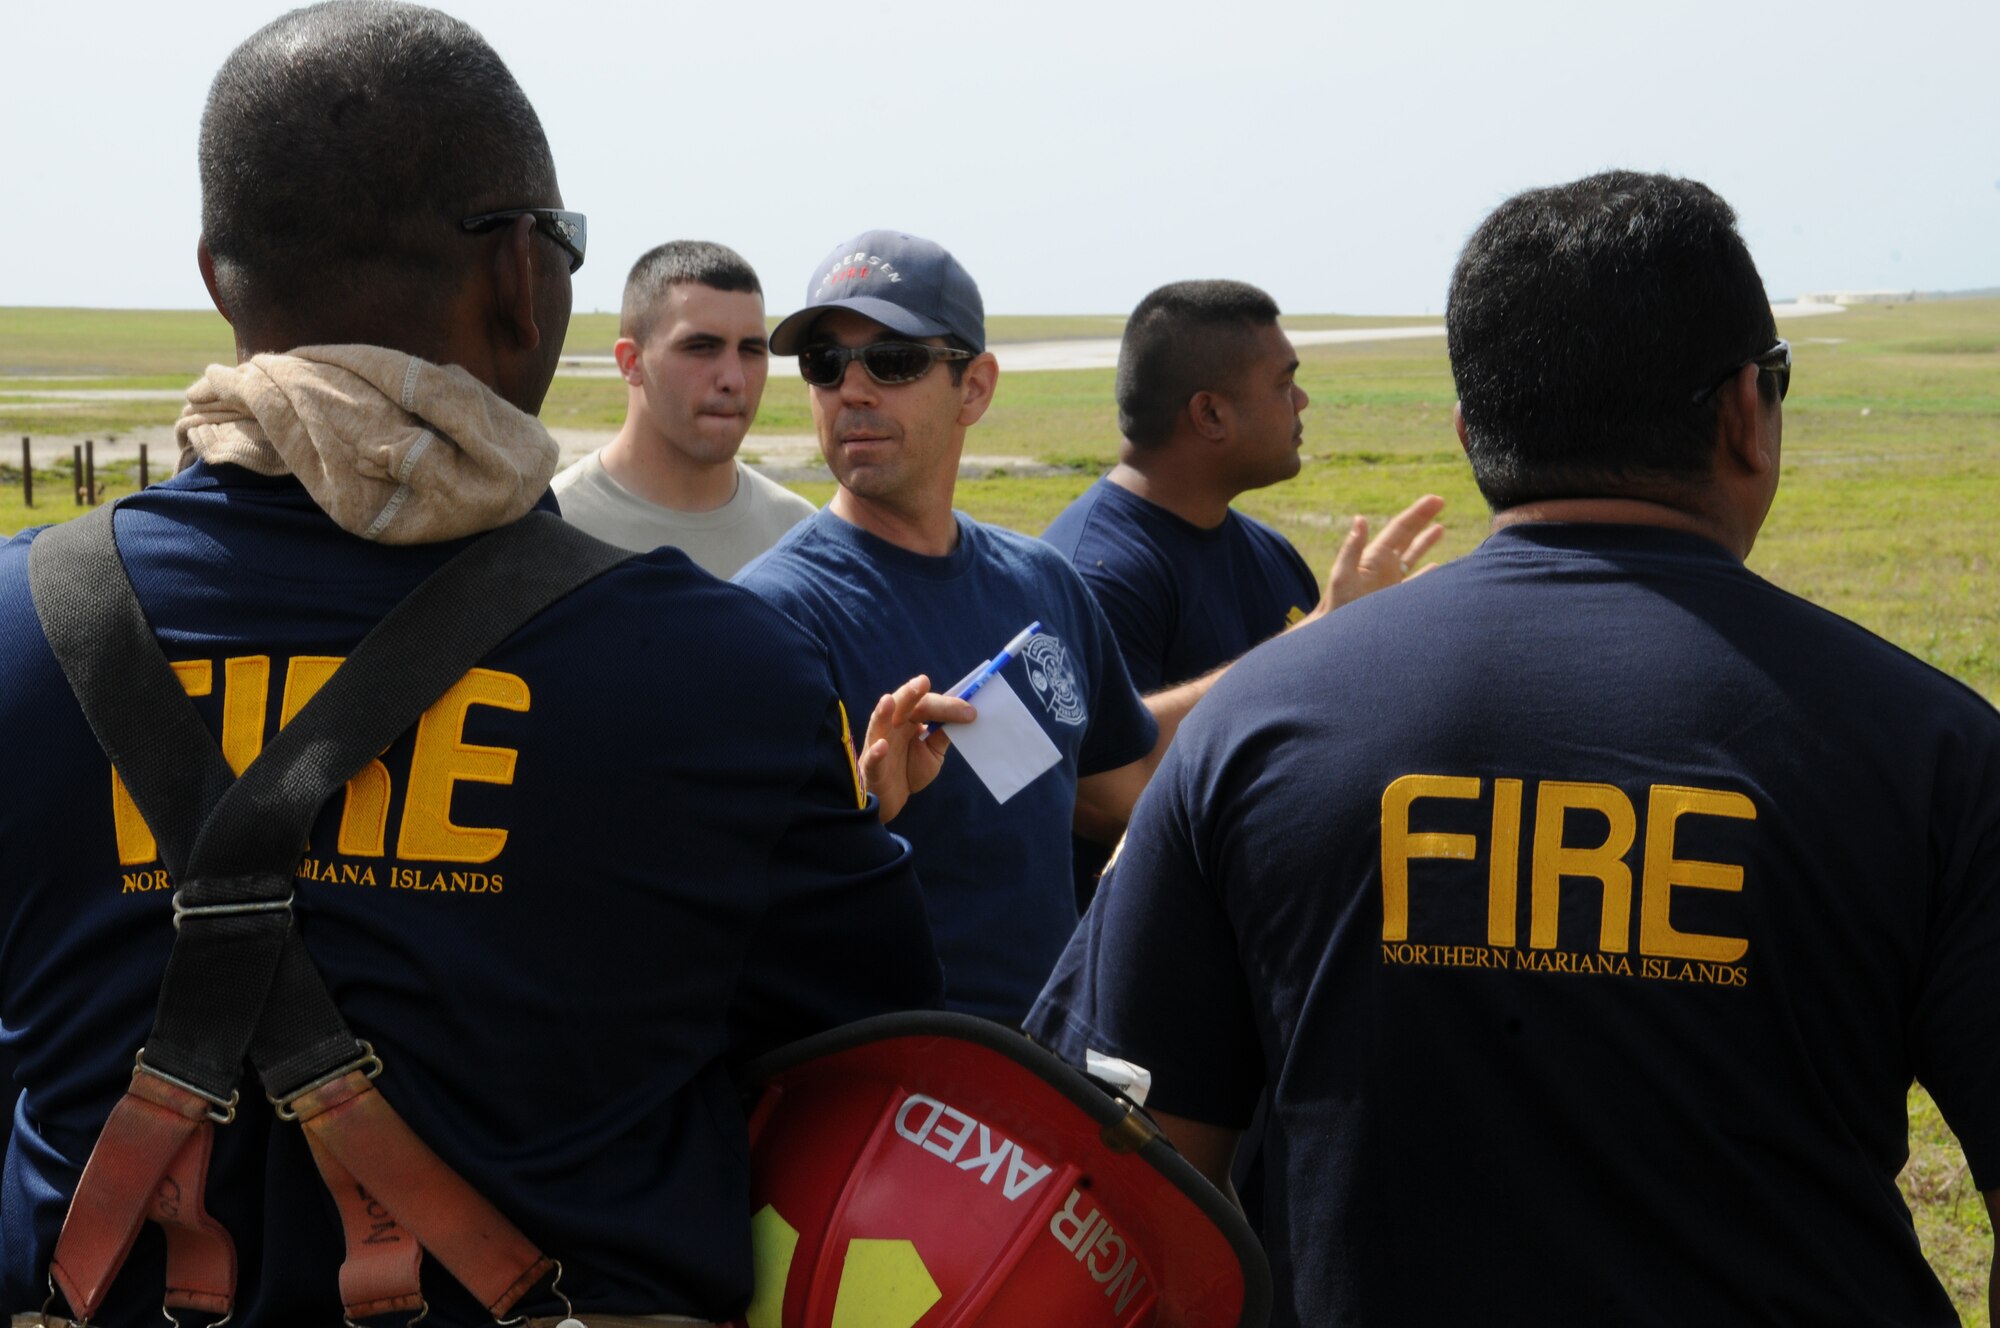 Jason Crandall, 36th Civil Engineer Squadron Fire and Emergency Services crew chief, briefs Andersen and Saipan fire personnel before a structural fire exercise on Andersen Air Force Base, Guam, March 27, 2013. Andersen Fire and Emergency Services personnel hosted four Saipan fire officers for joint fire training during their visit to Guam March 25-29. (U.S. Air Force photo by Staff Sgt. Melissa B. White/Released)